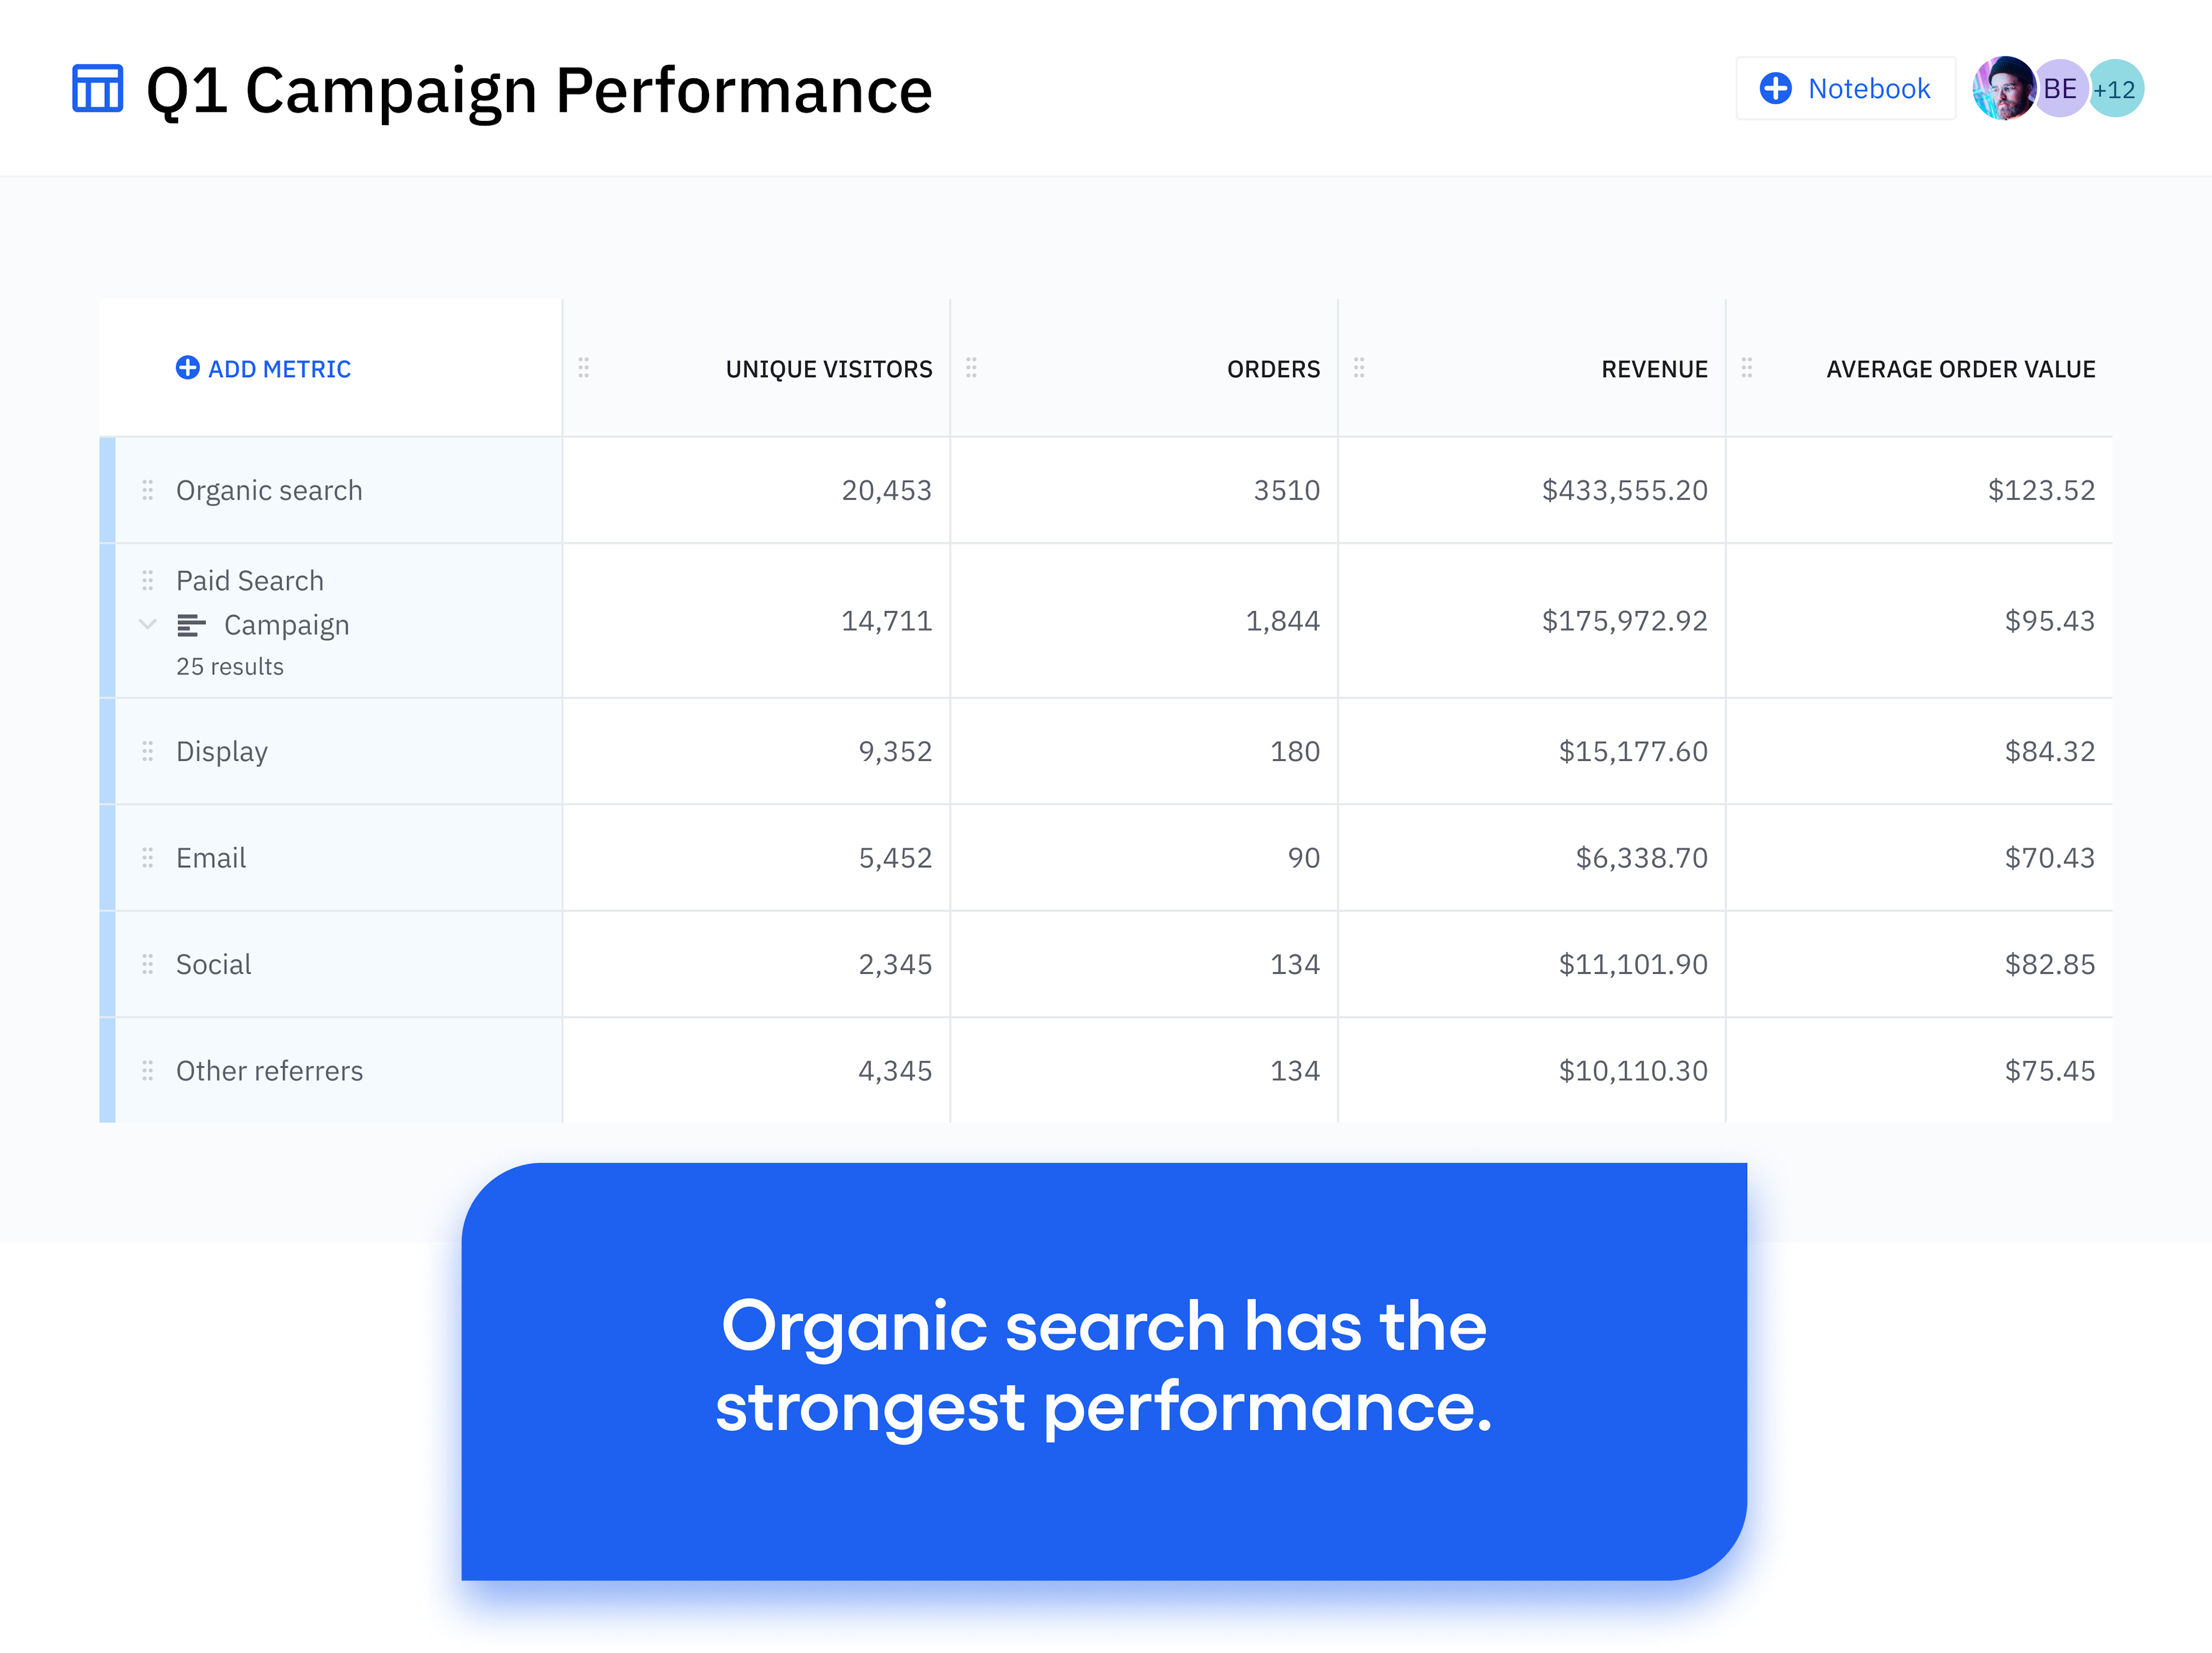 Find your best channels and campaigns